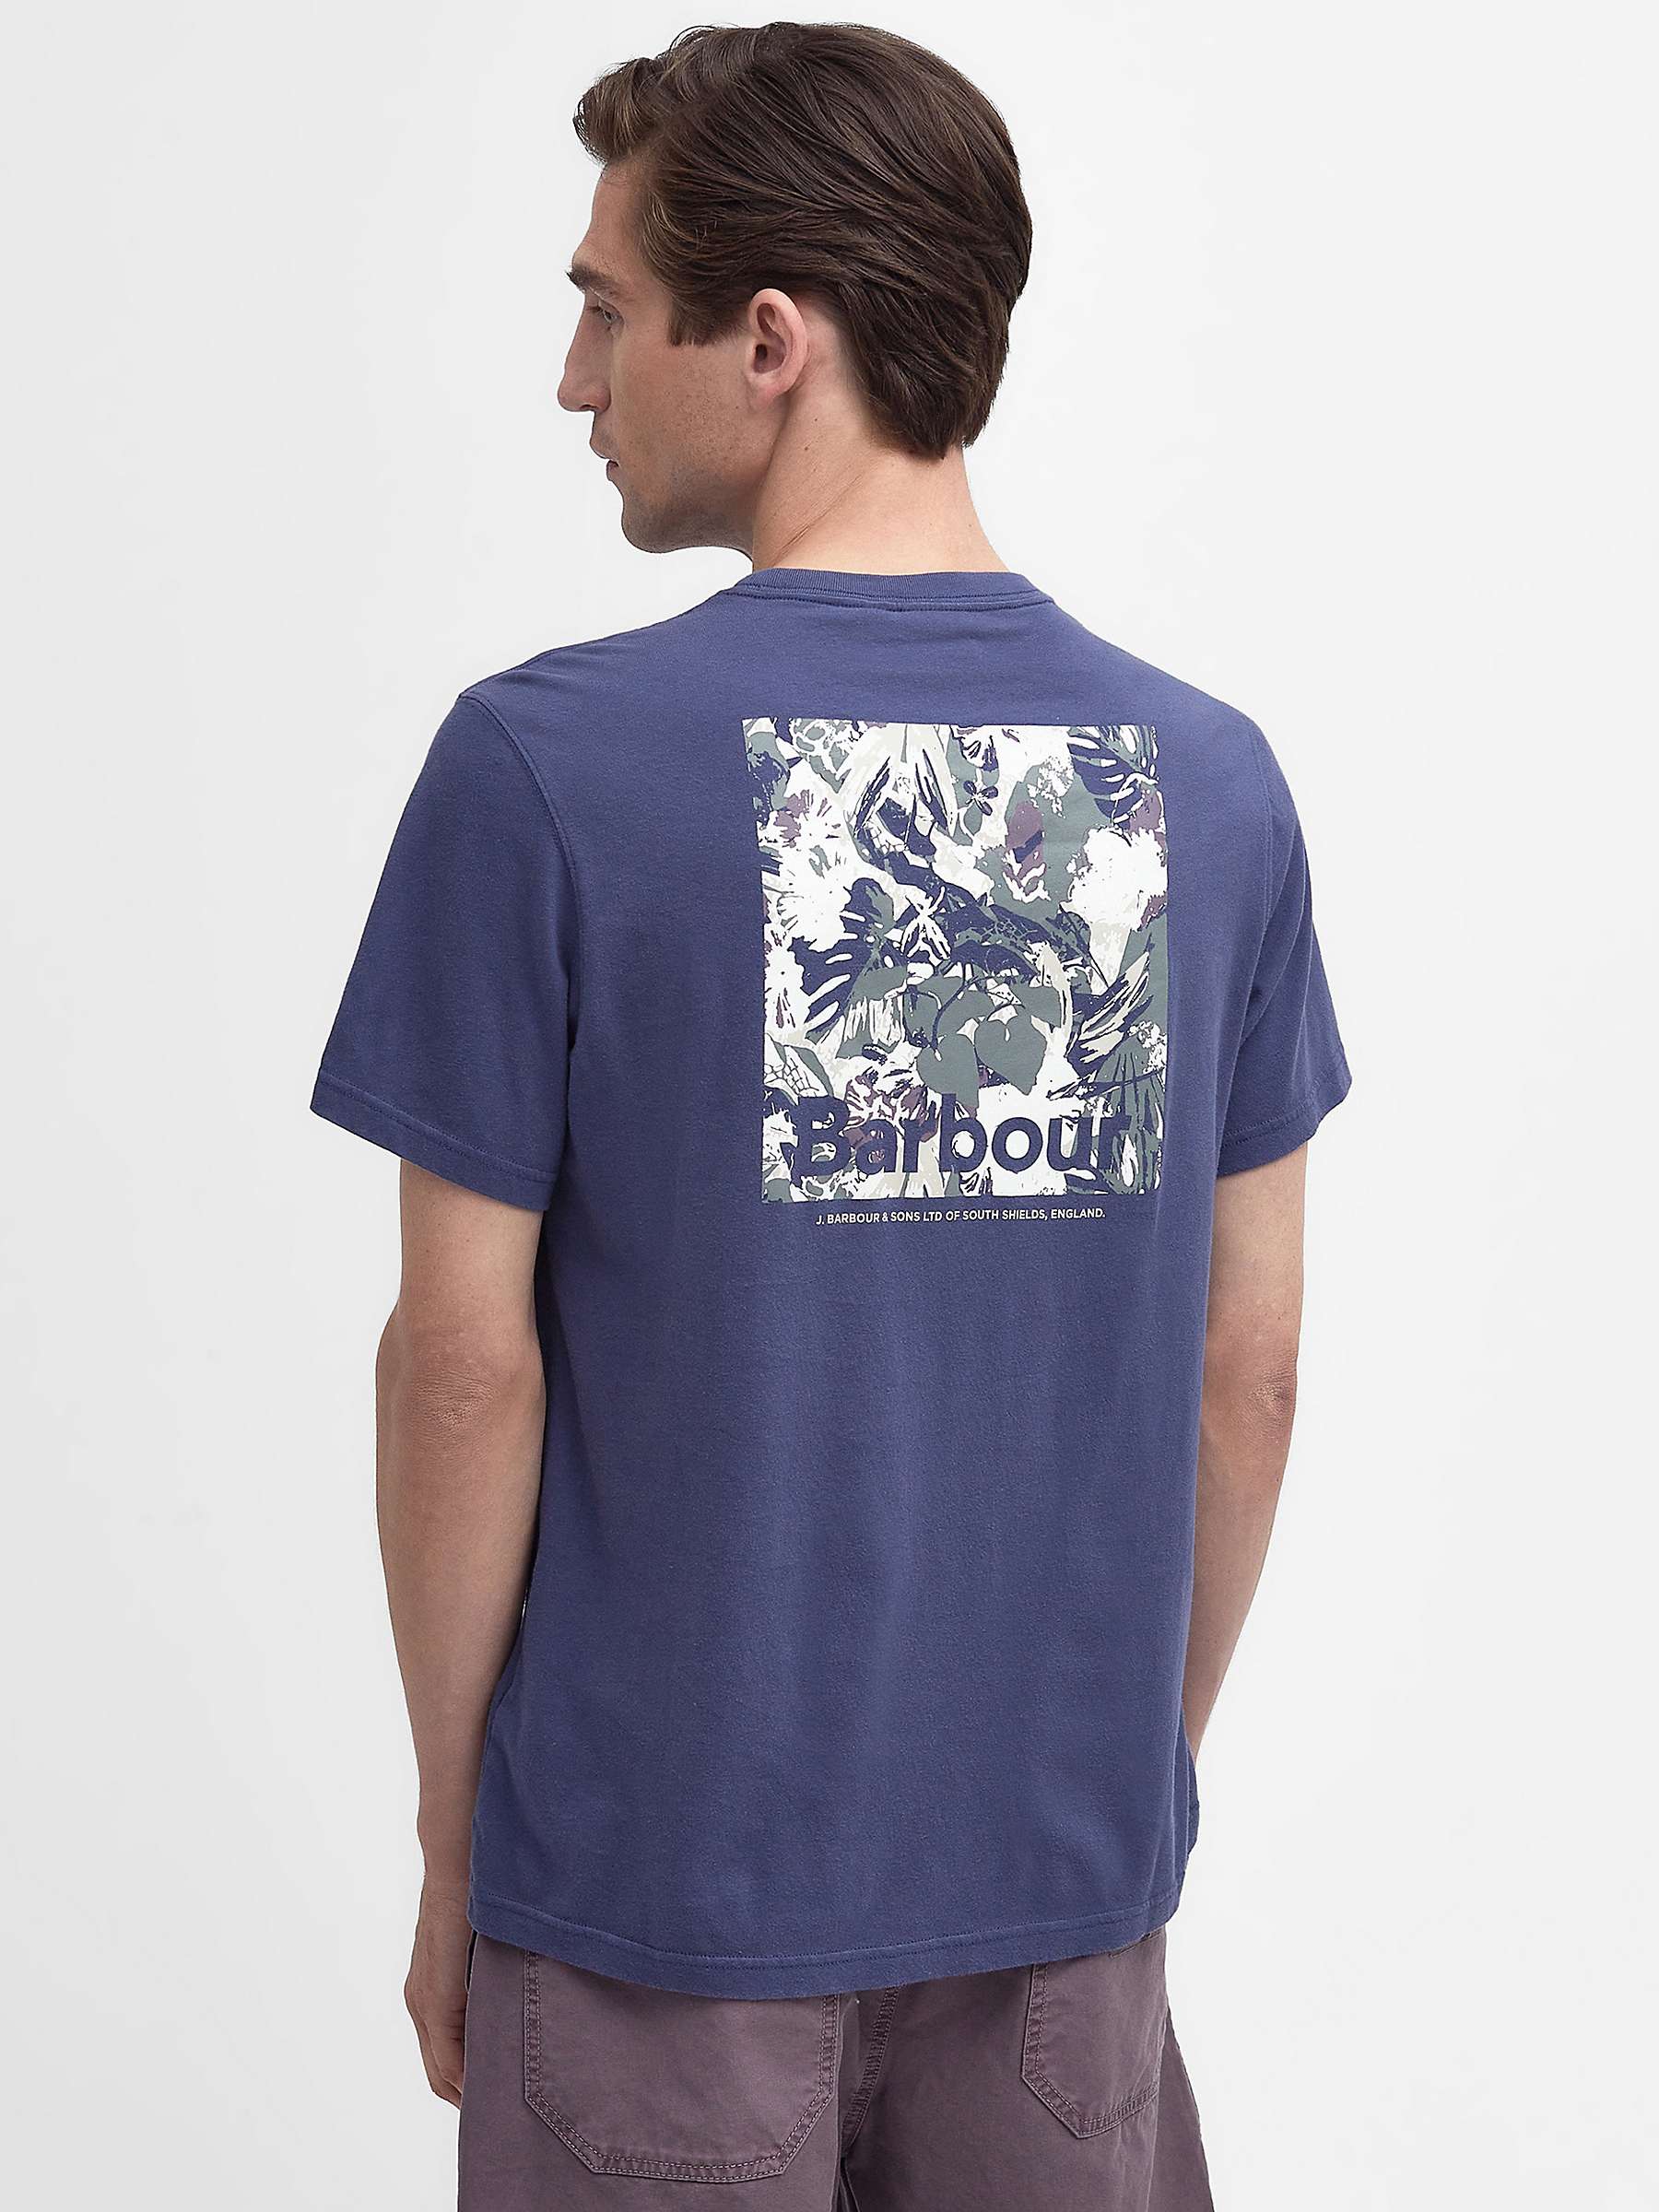 Buy Barbour Hindle Graphic T-Shirt, Oceana Online at johnlewis.com